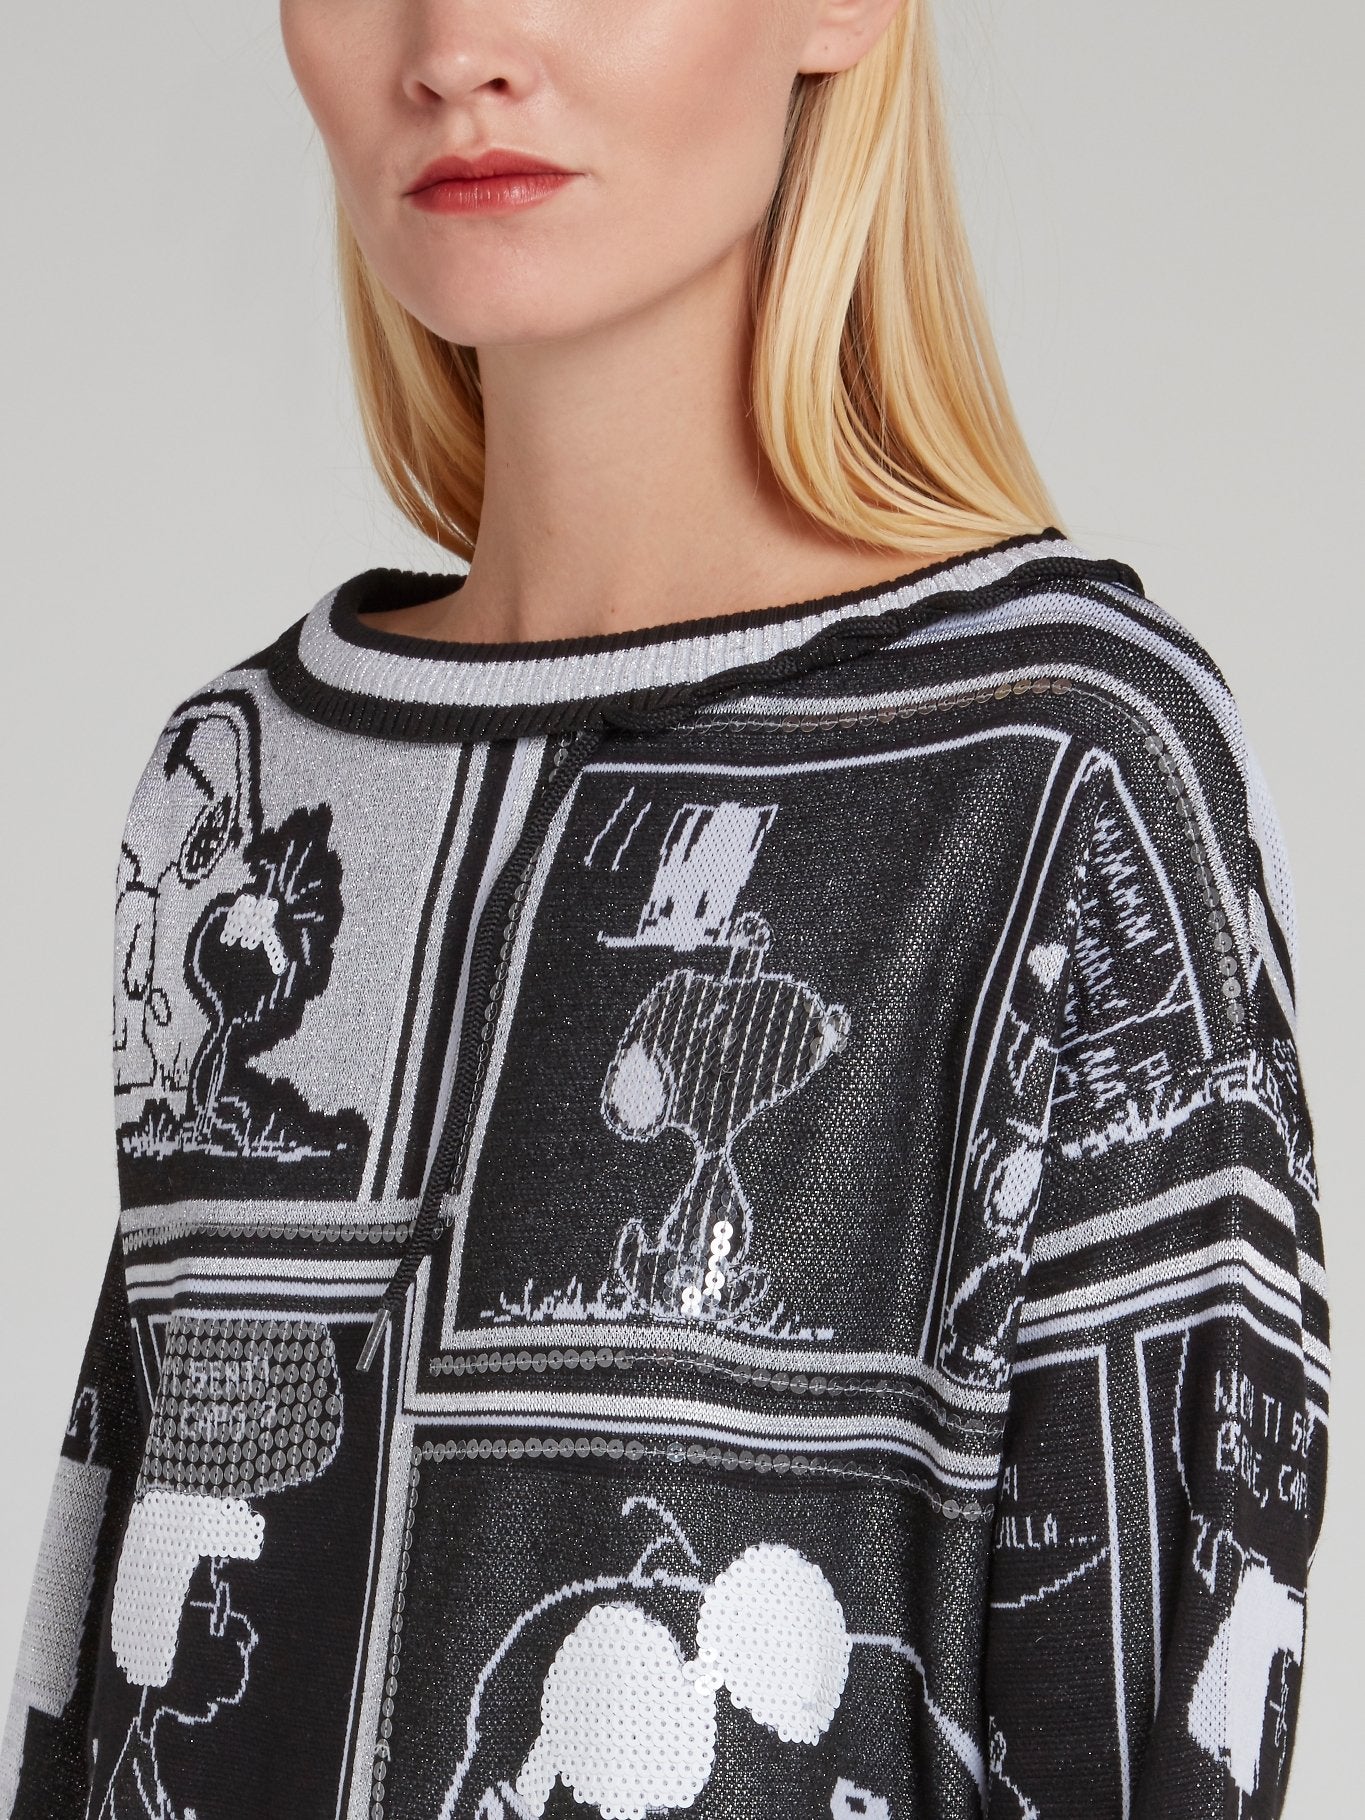 Snoopy Black Sequin Knitted Top